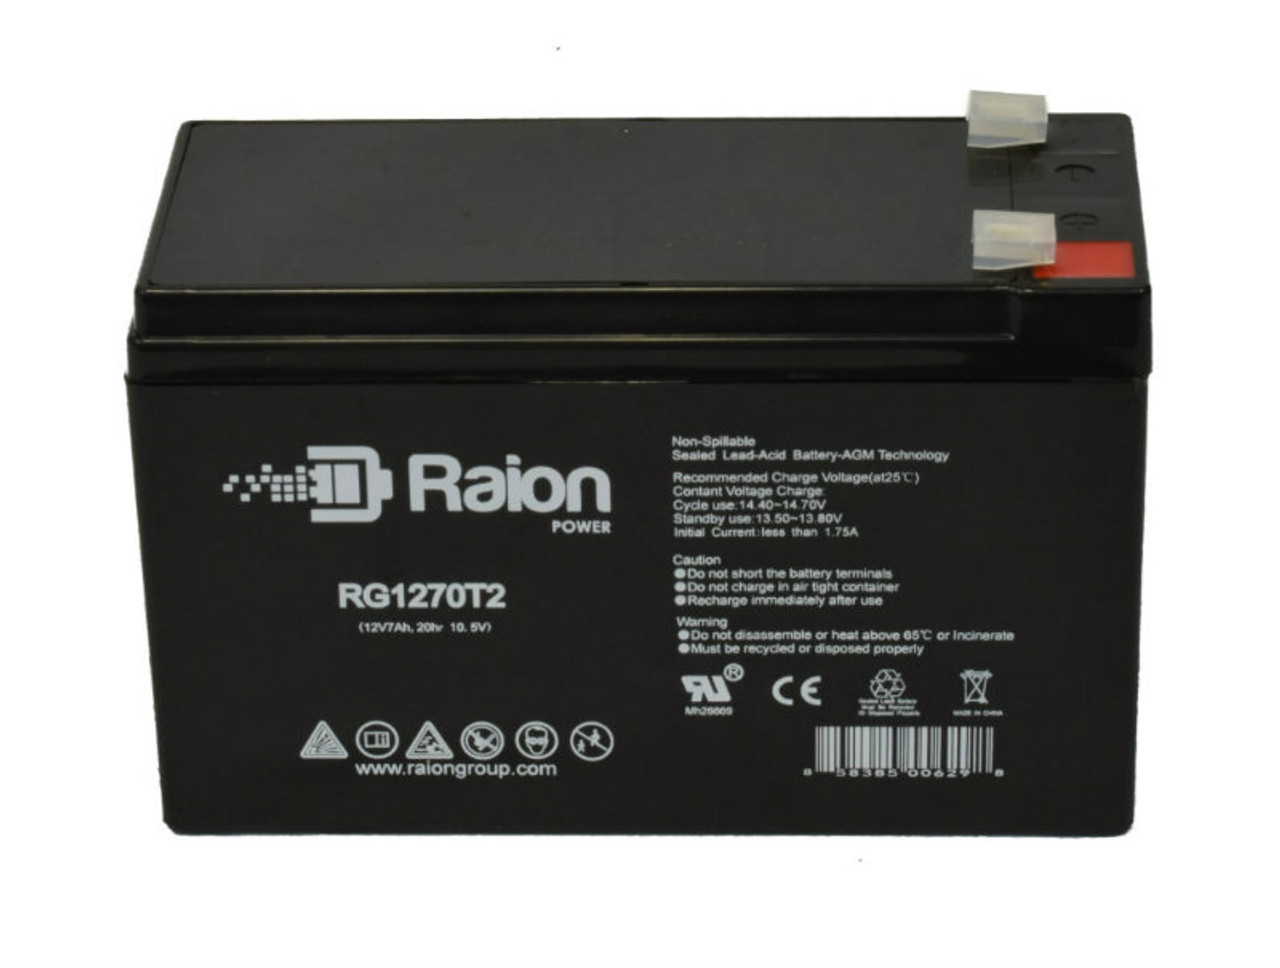 Raion Power RG1270T1 12V 7Ah Lead Acid Battery for Altronix SMP3PMCTXPD16CB